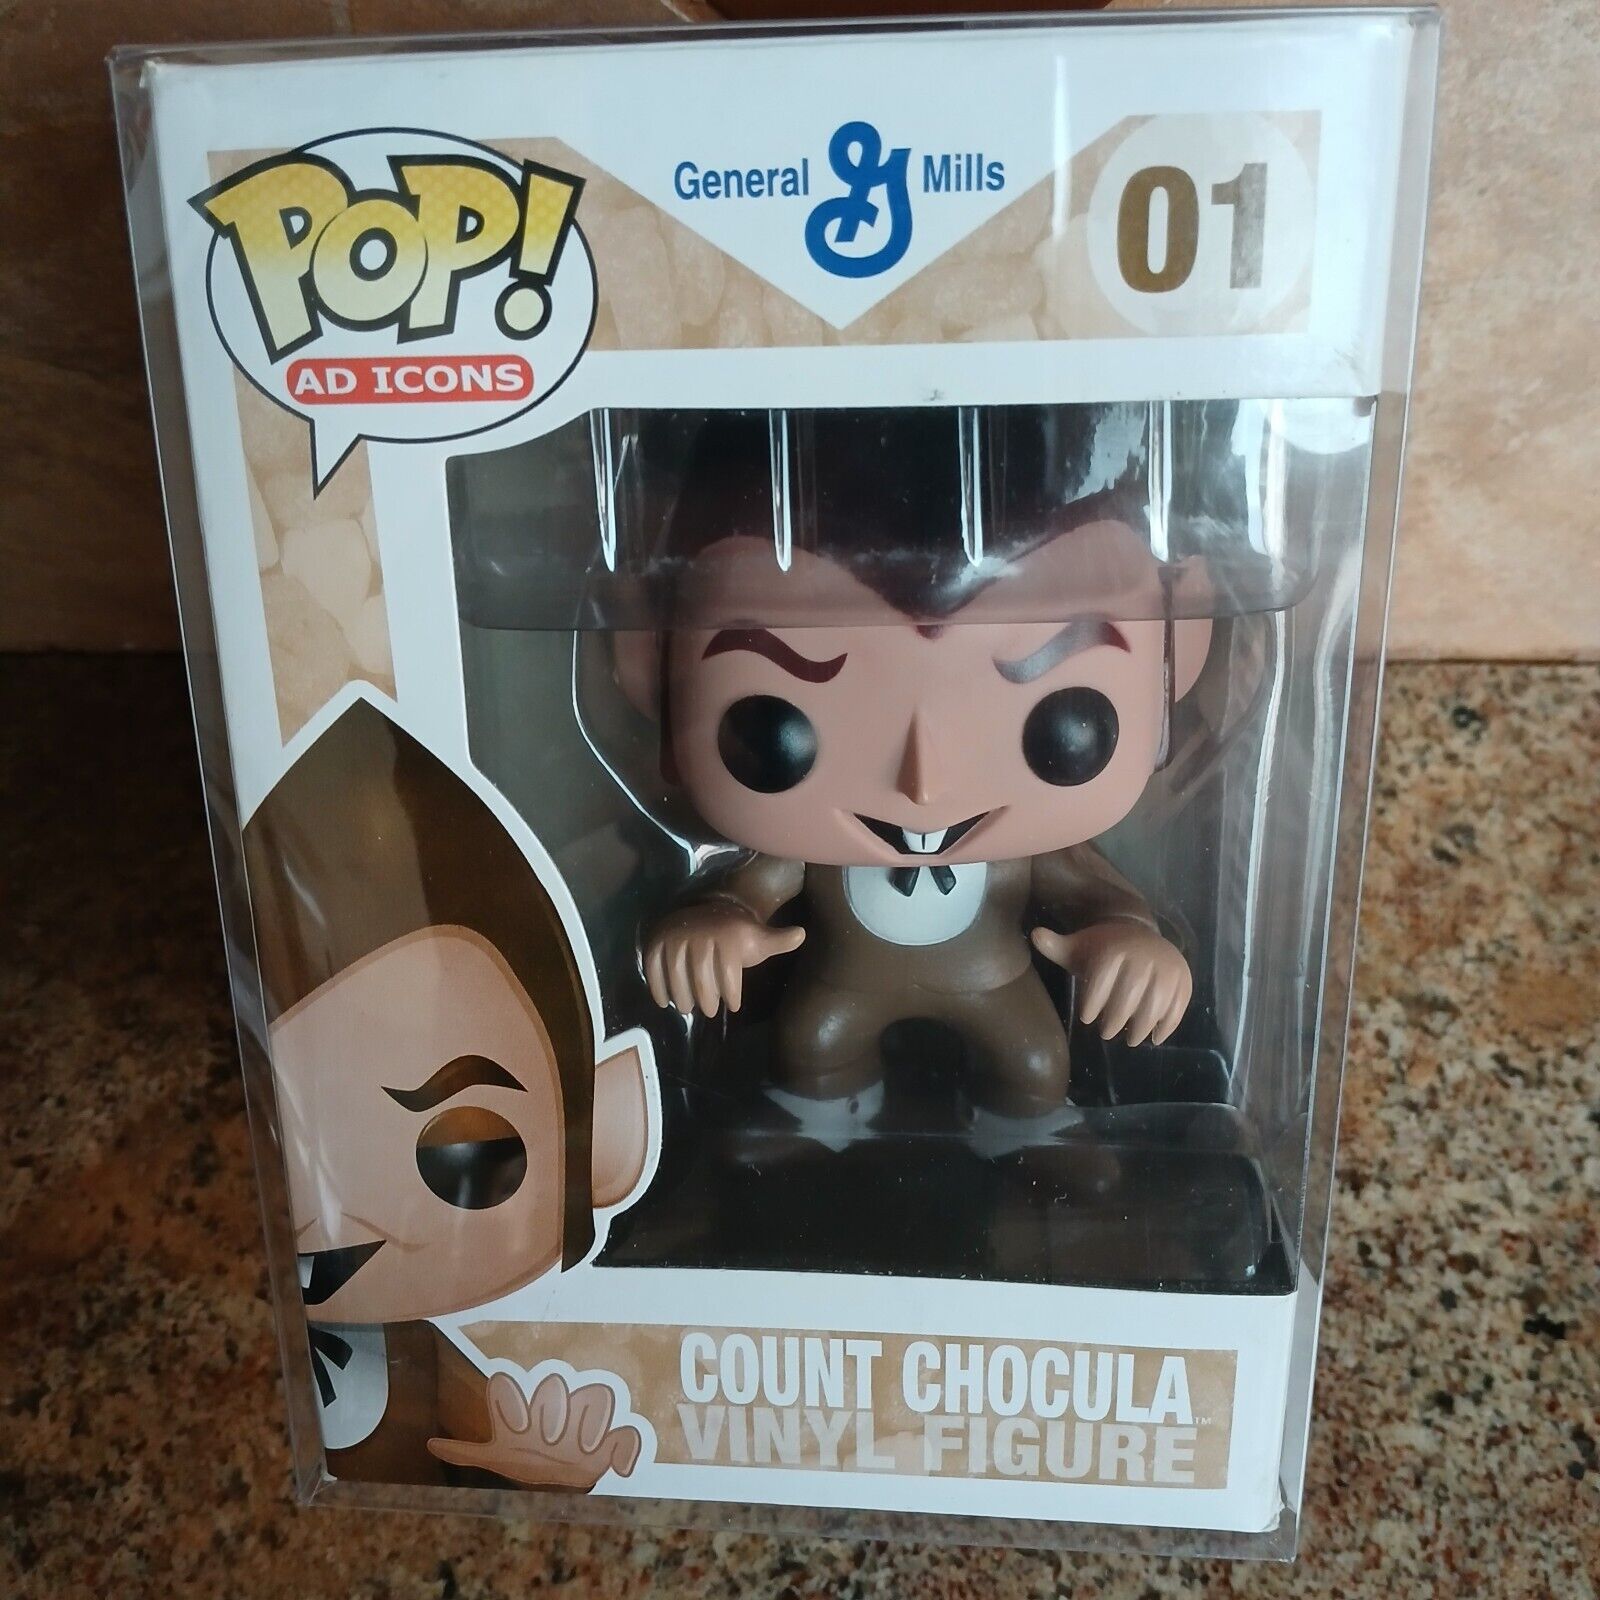 VAULTED Funko POP AD ICONS General Mills COUNT CHOCULA 01 w/ PROTECTOR - DAMAGED